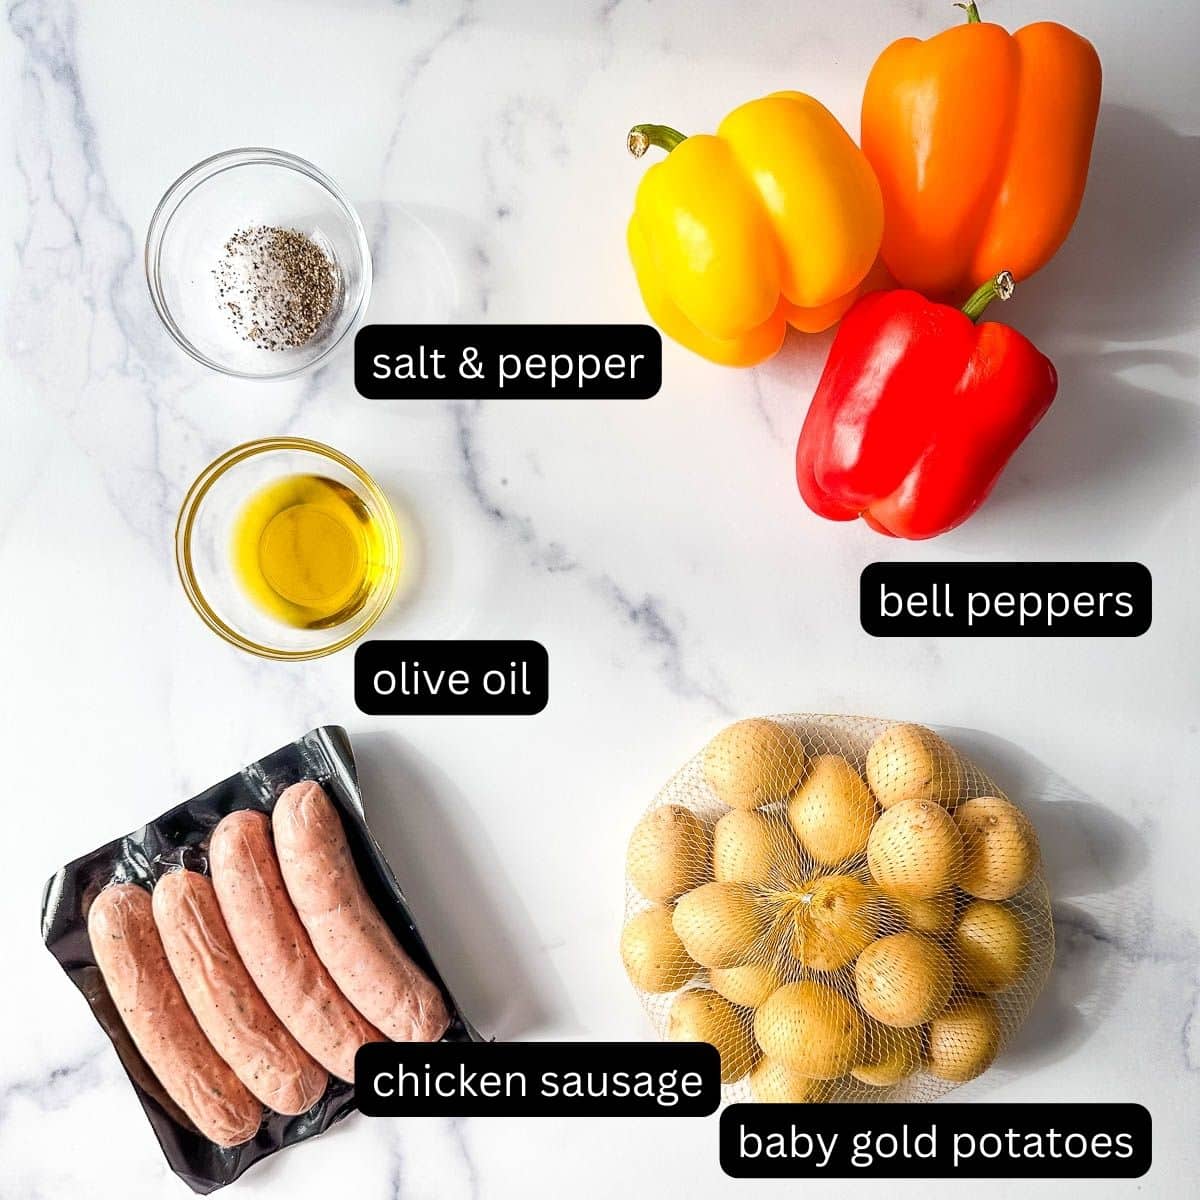 The ingredients for a recipe for sausage and potatoes on a marble table.